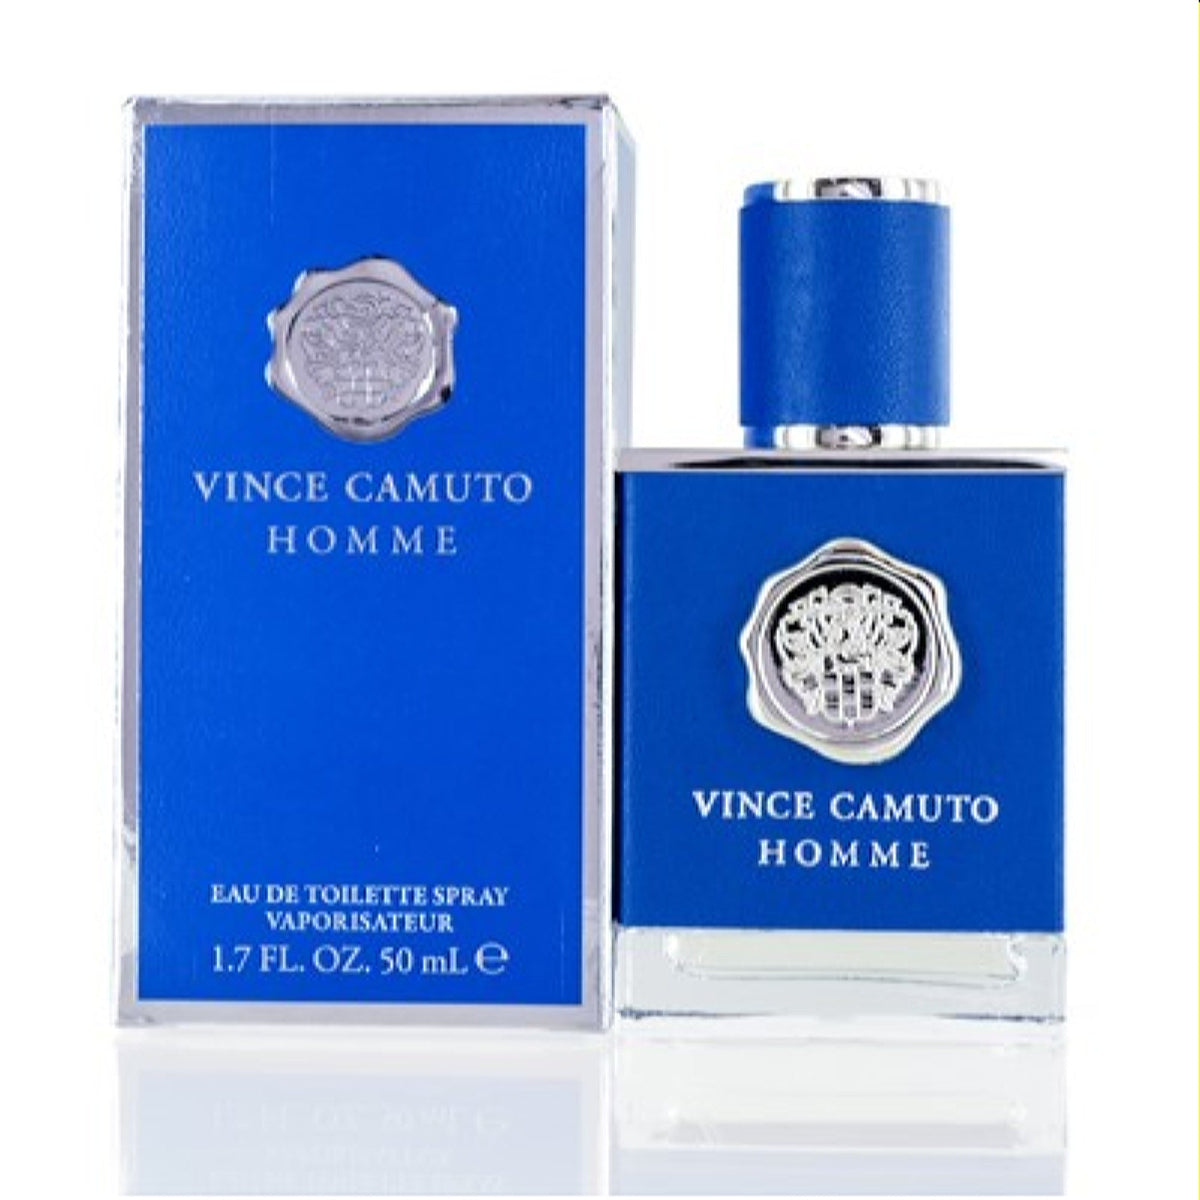 Vince Camuto Homme Vince Camuto Edt Spray 1.7 Oz (50 Ml) For Men 214.6670.77